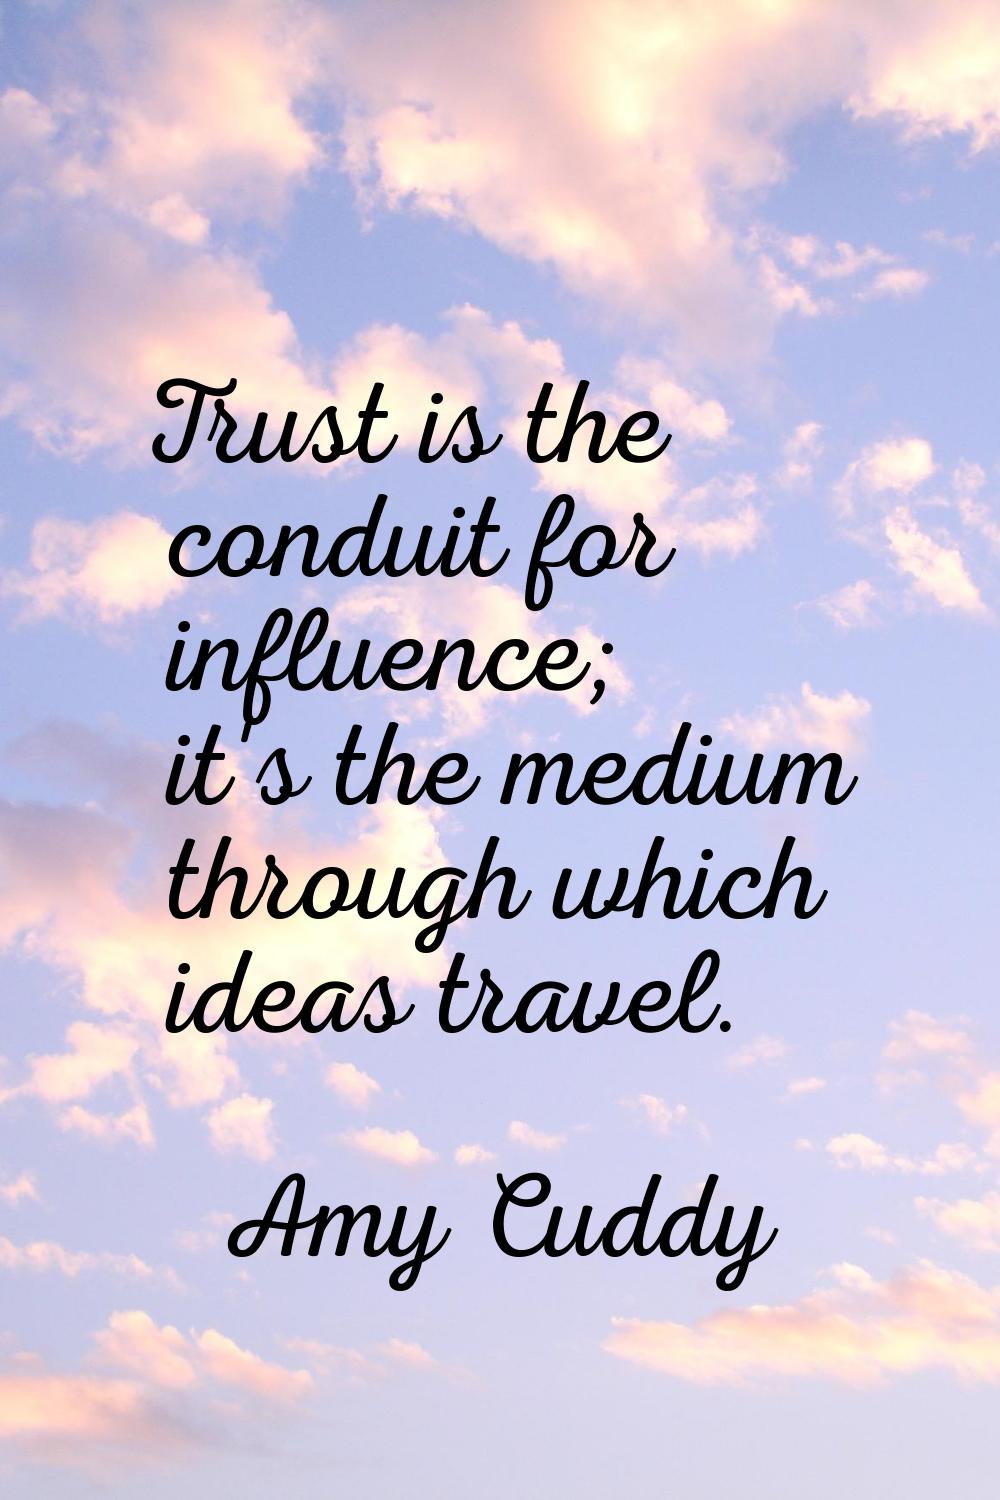 Trust is the conduit for influence; it's the medium through which ideas travel.